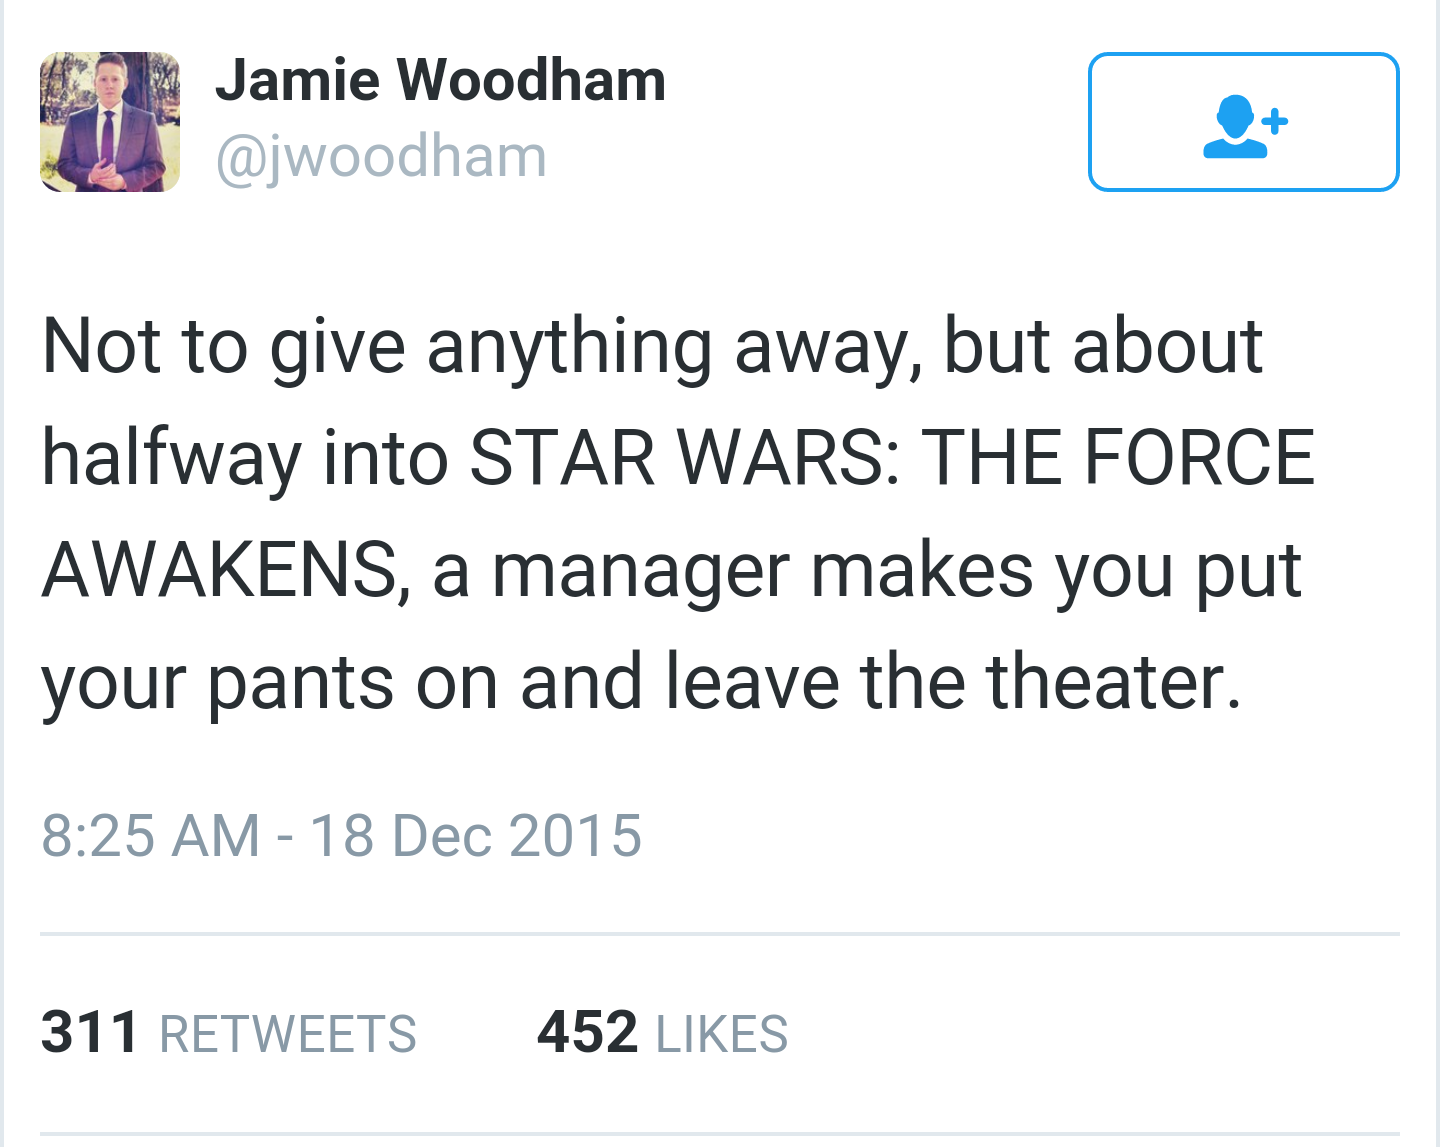 trump ukraine tweet - Jamie Woodham Not to give anything away, but about halfway into Star Wars The Force Awakens, a manager makes you put your pants on and leave the theater. 311 452